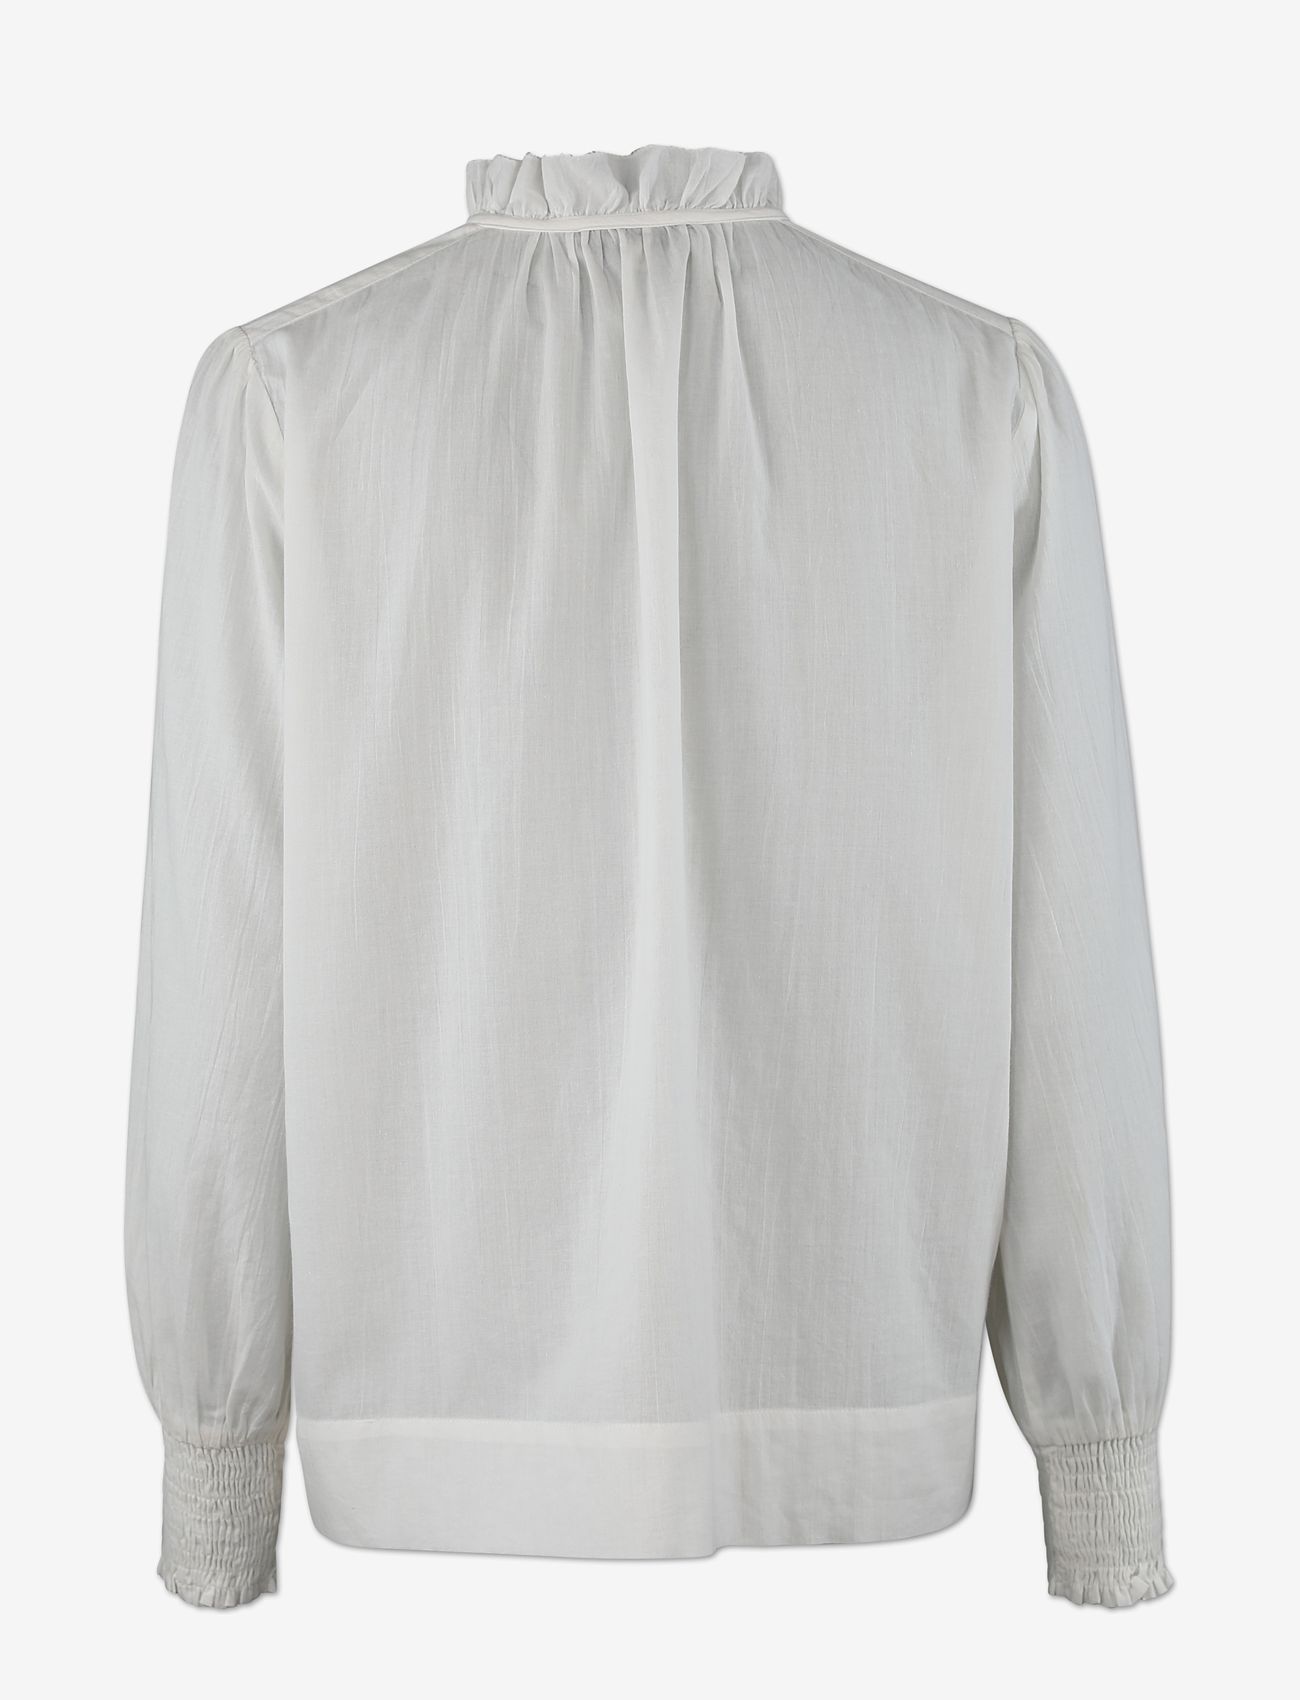 Six Ames - FRILLA - long-sleeved blouses - off white - 1